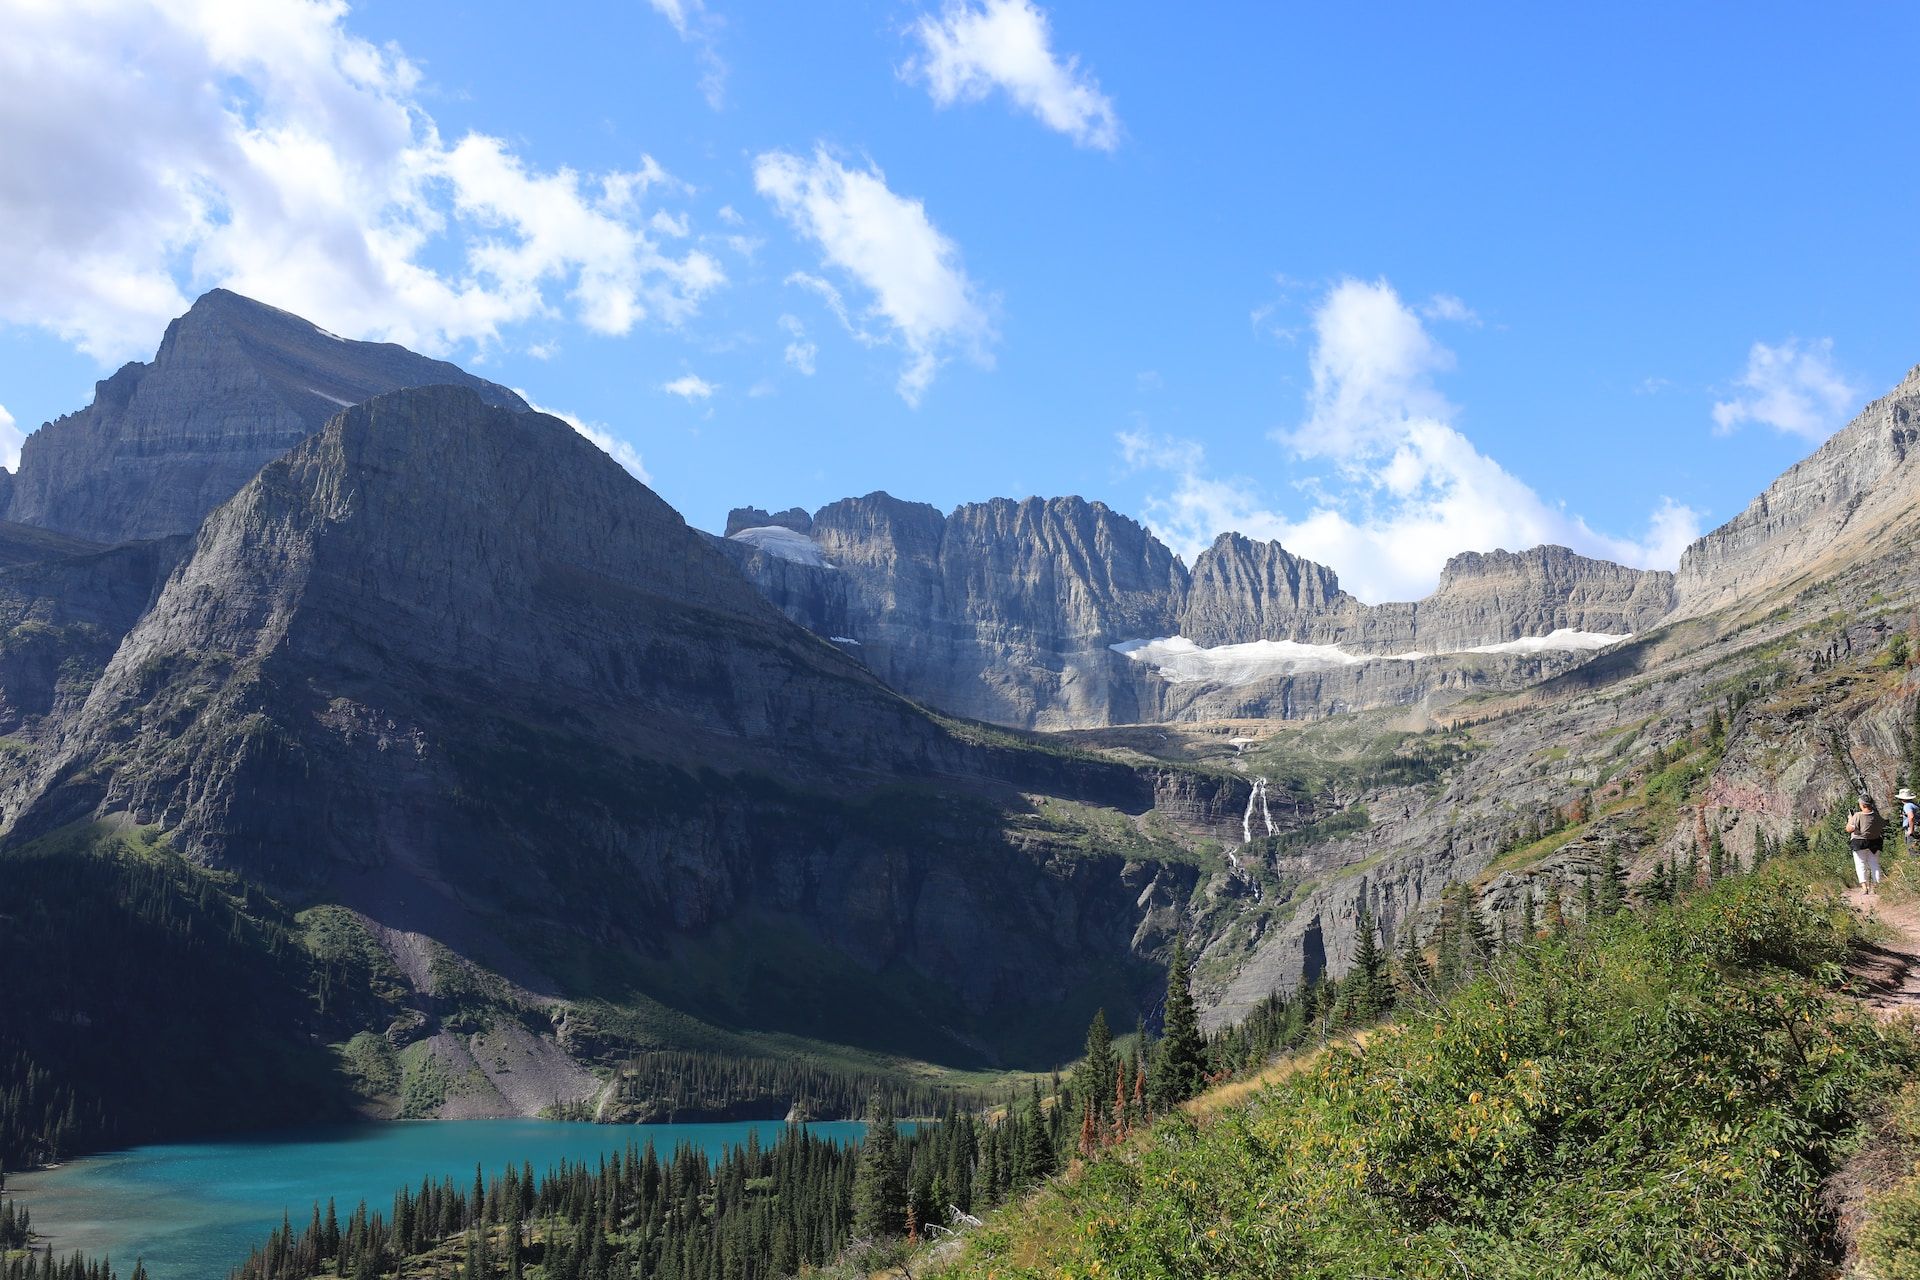 A view of Grinnell Lake between mountains, in Glacier National Park